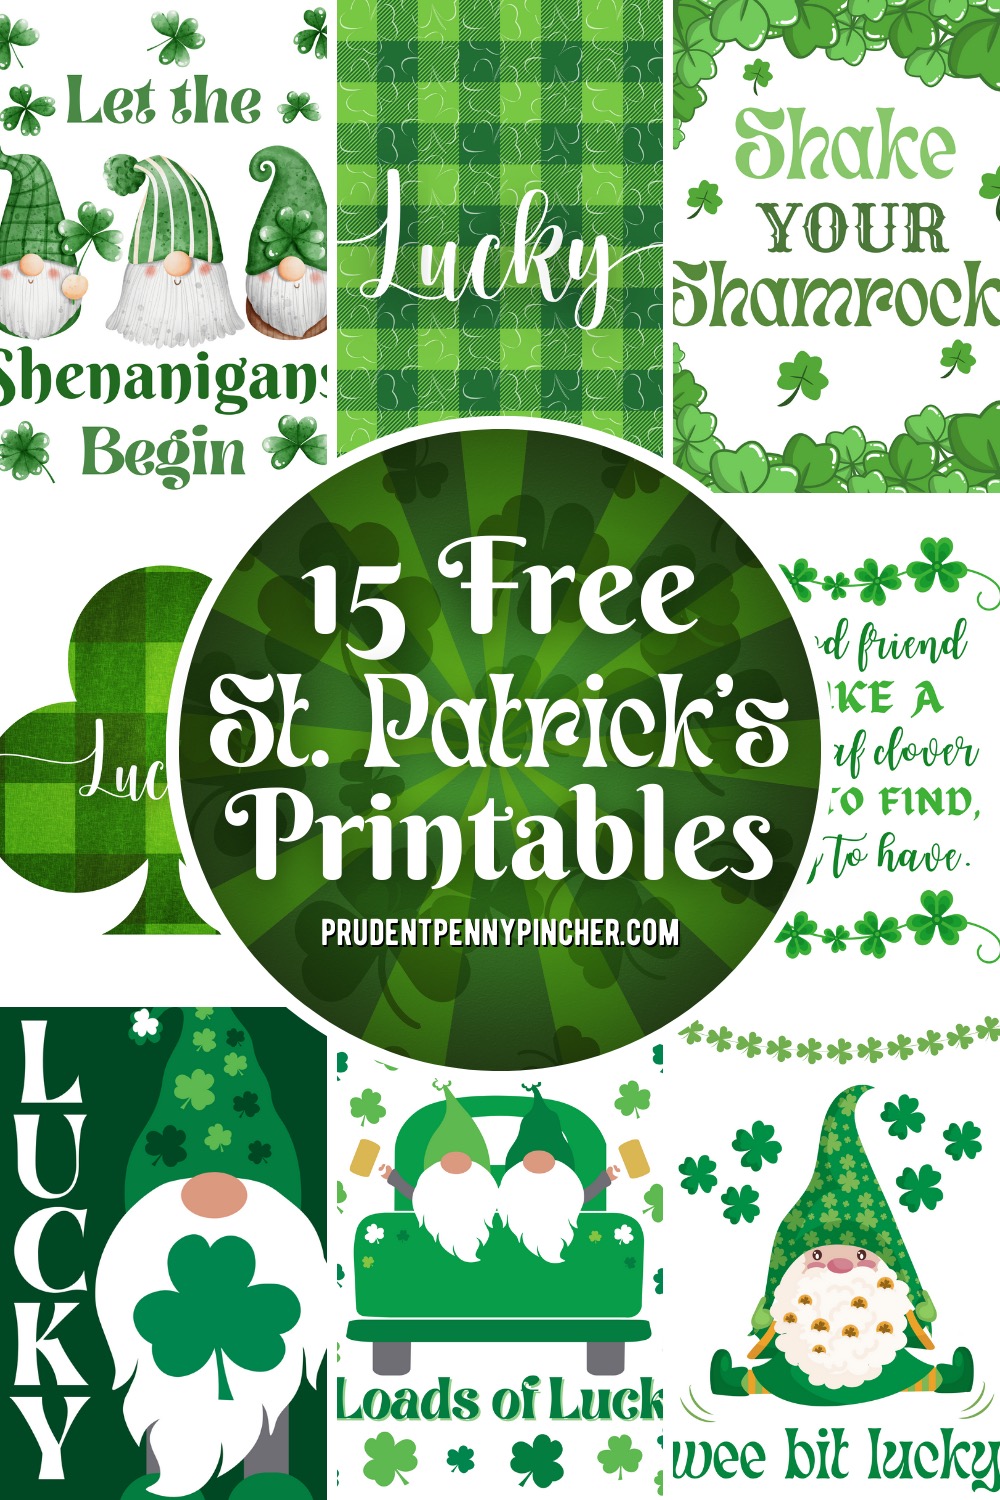 St. Patrick's Day Quotes & Sayings: FREE Cricut SVG Template